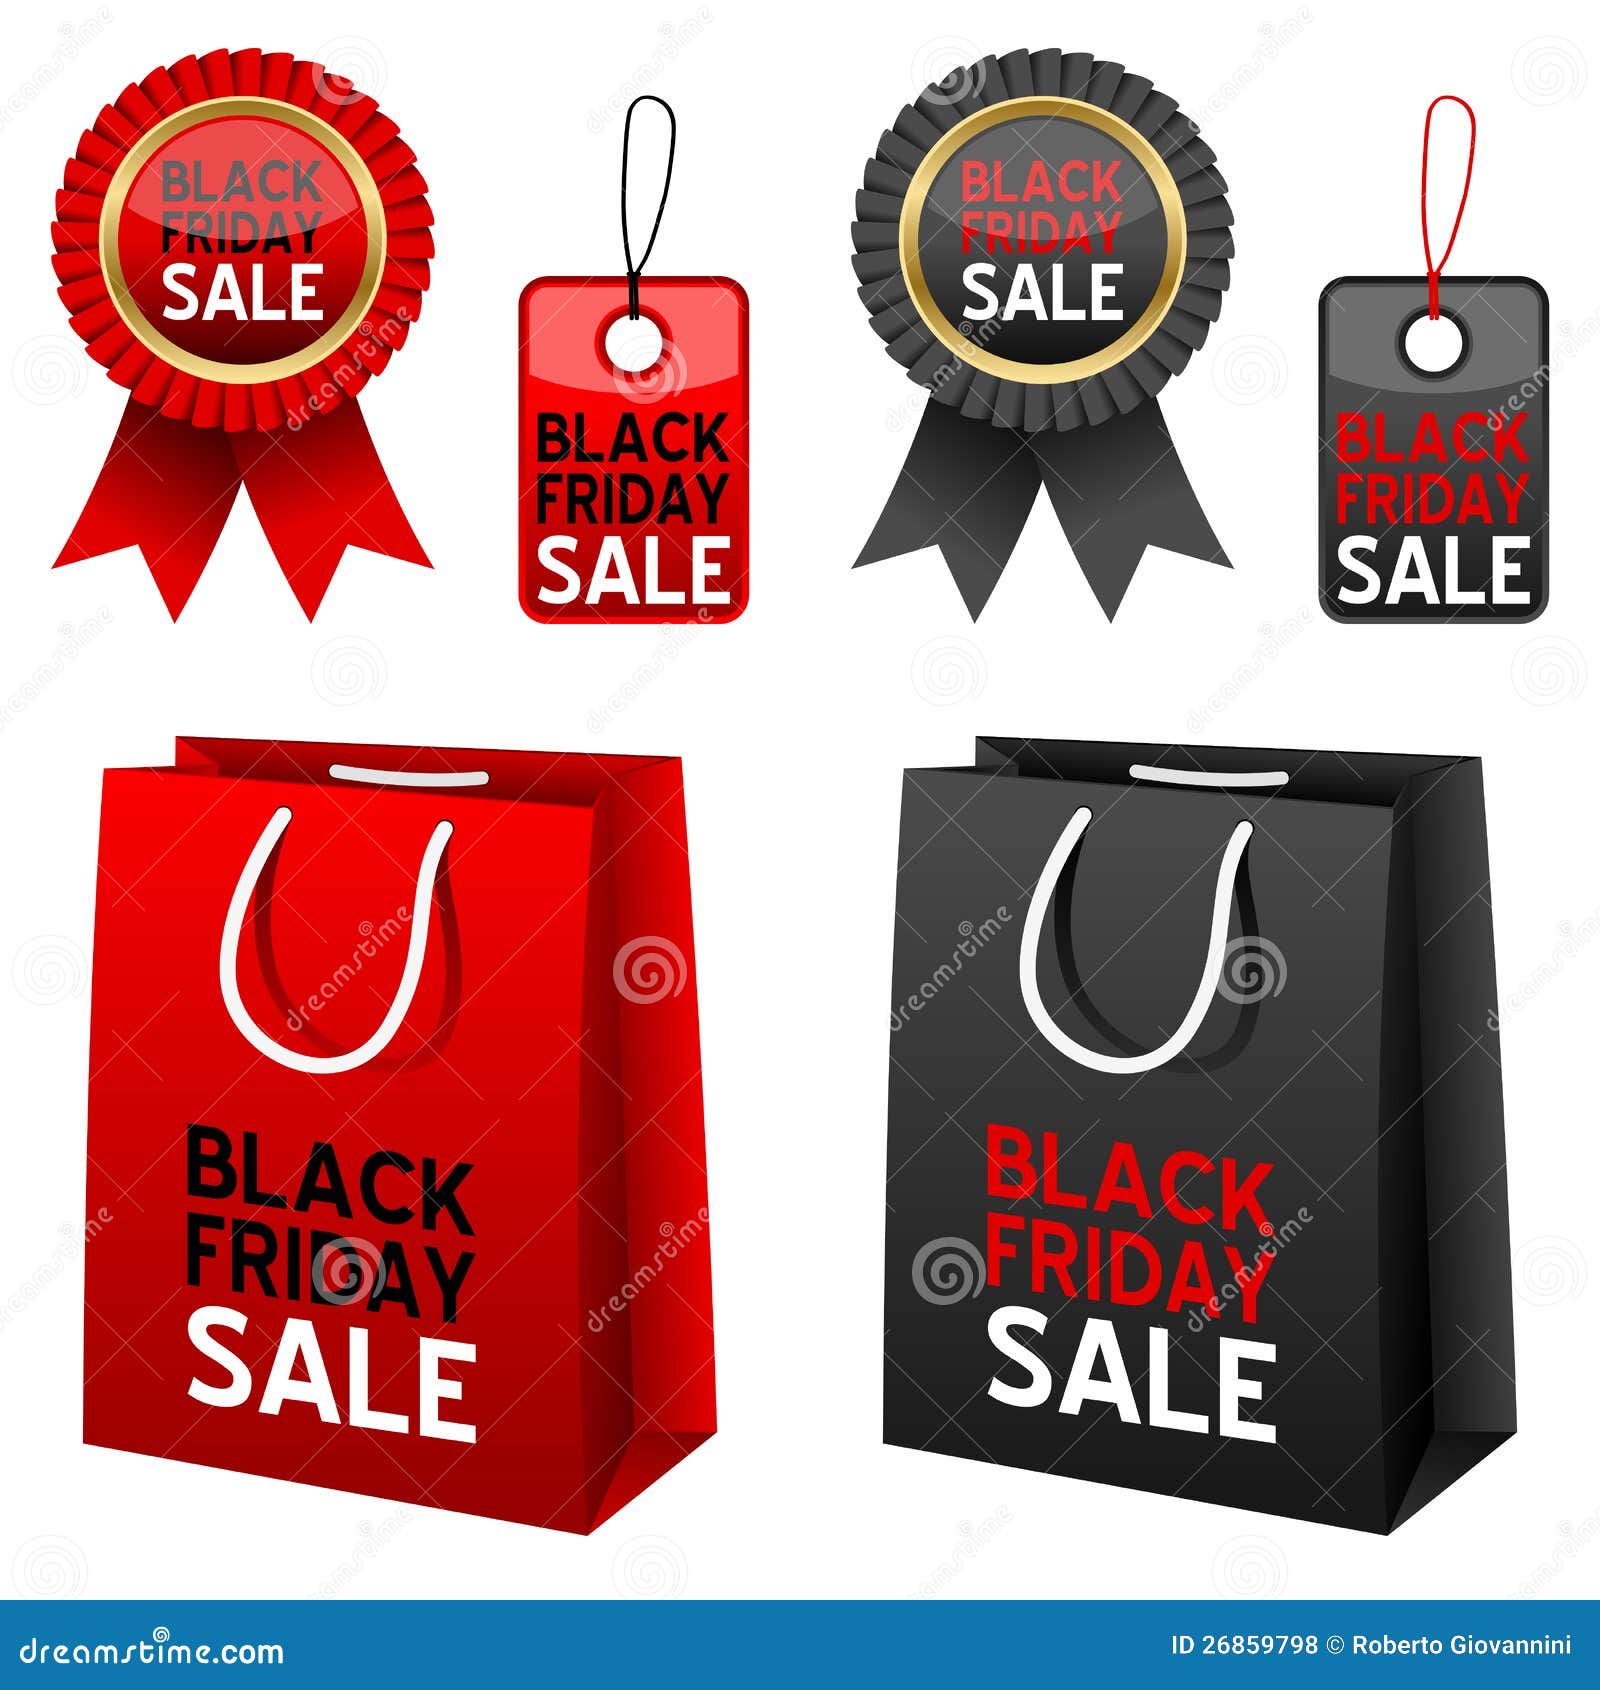 Black Friday Sale Collection Royalty Free Stock Photos - Image: 26859798